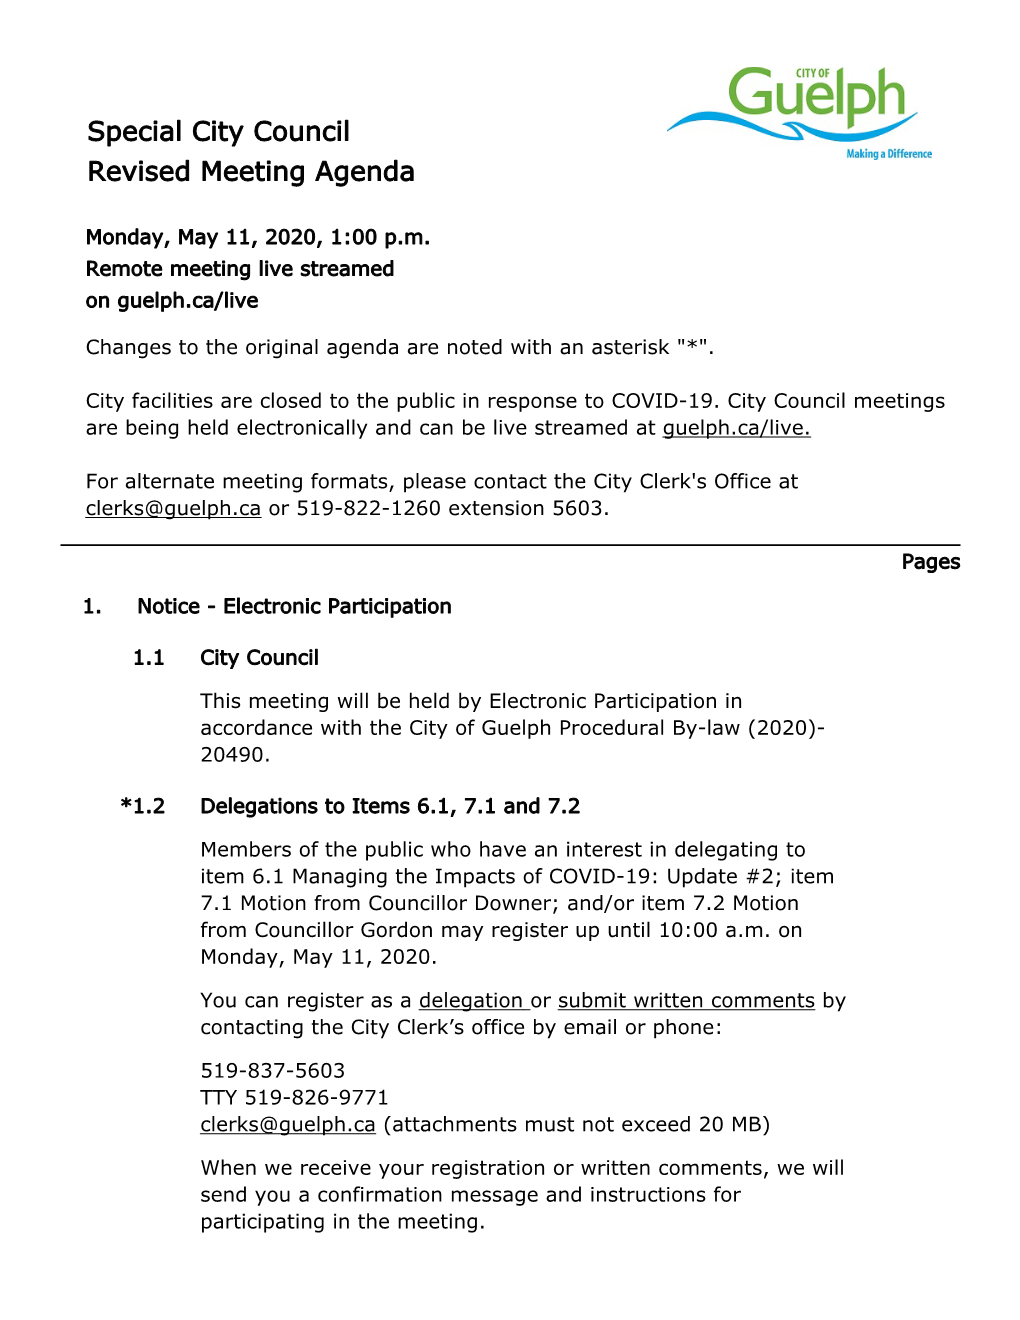 Guelph City Council Meeting May 11, 2Pm